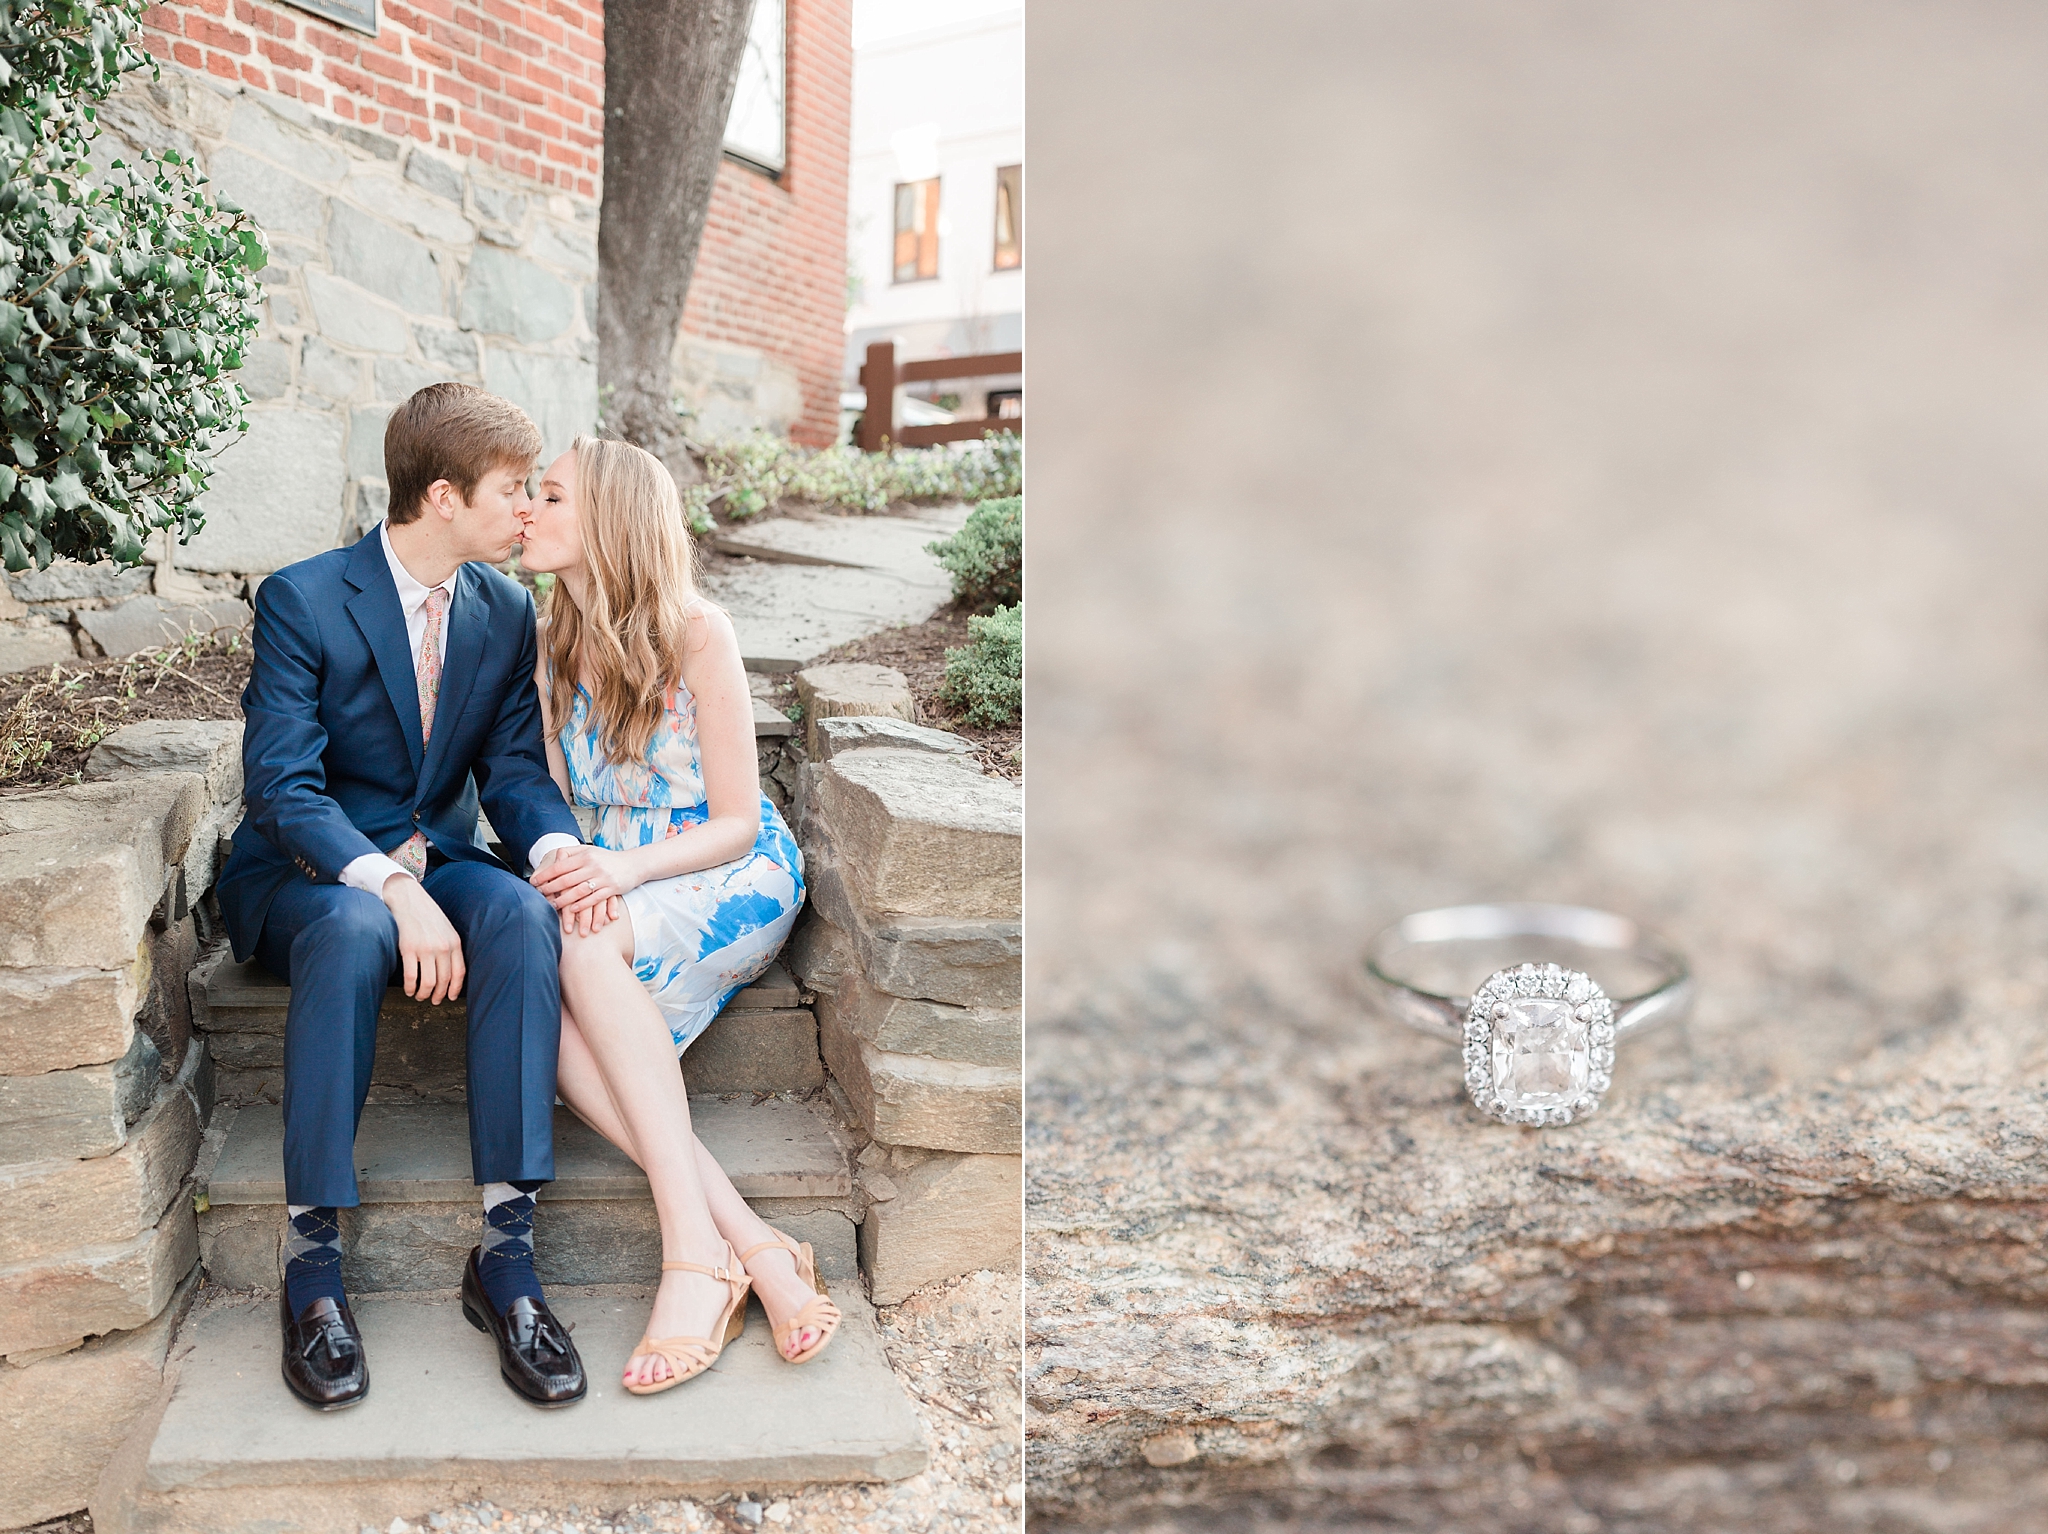 This Georgetown engagement session captured by Washington, DC wedding photographer, Alicia Lacey is complete with a stylish couple and their adorable puppy!